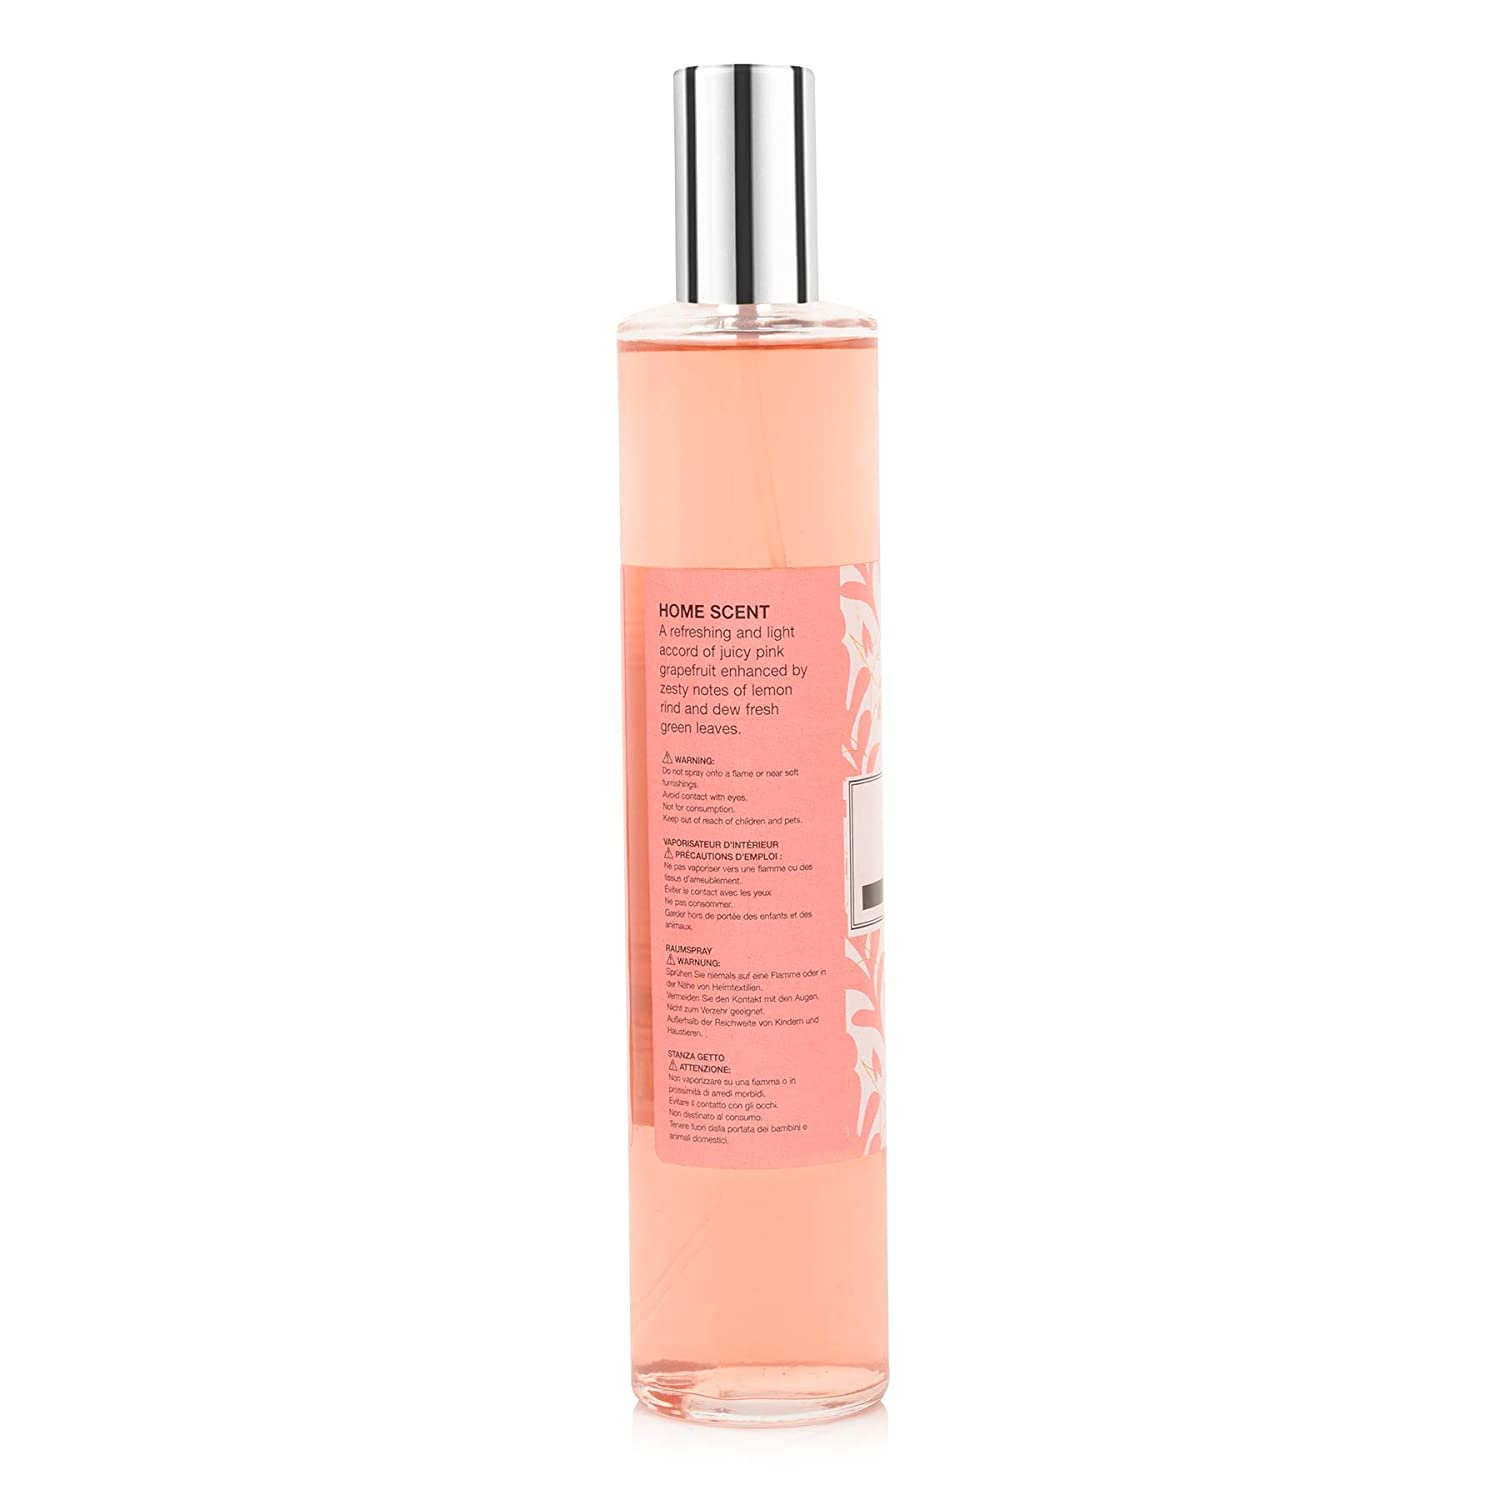 Scented Room Spray Pink Pomelo